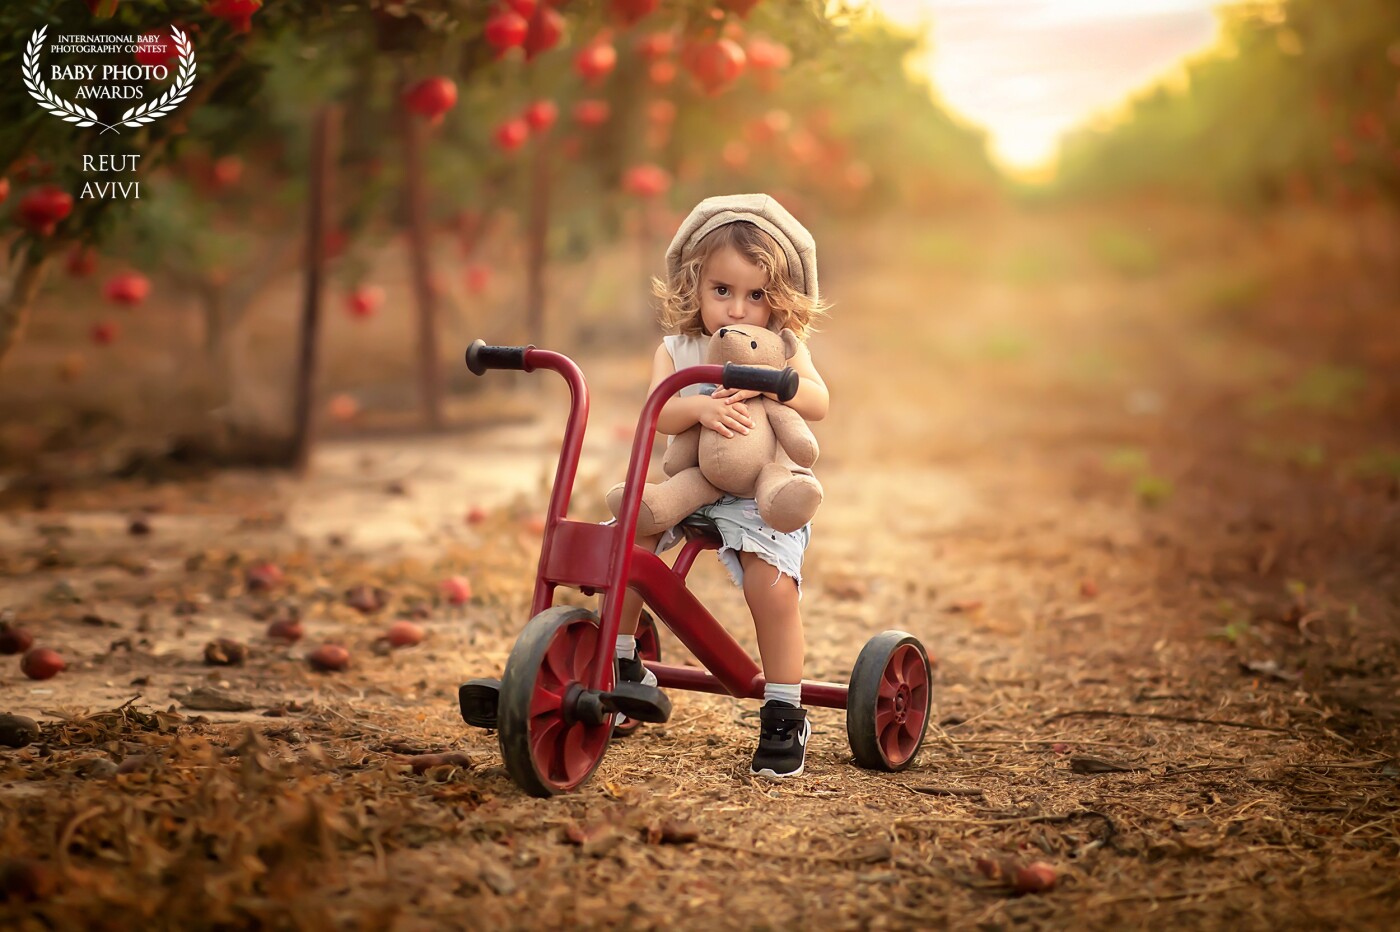 As the sun set over the pomegranate field, a sweet little boy sat on his red bike, clinging tightly to his teddy bear. The warm glow of the evening enveloped them both, creating a moment of pure contentment.